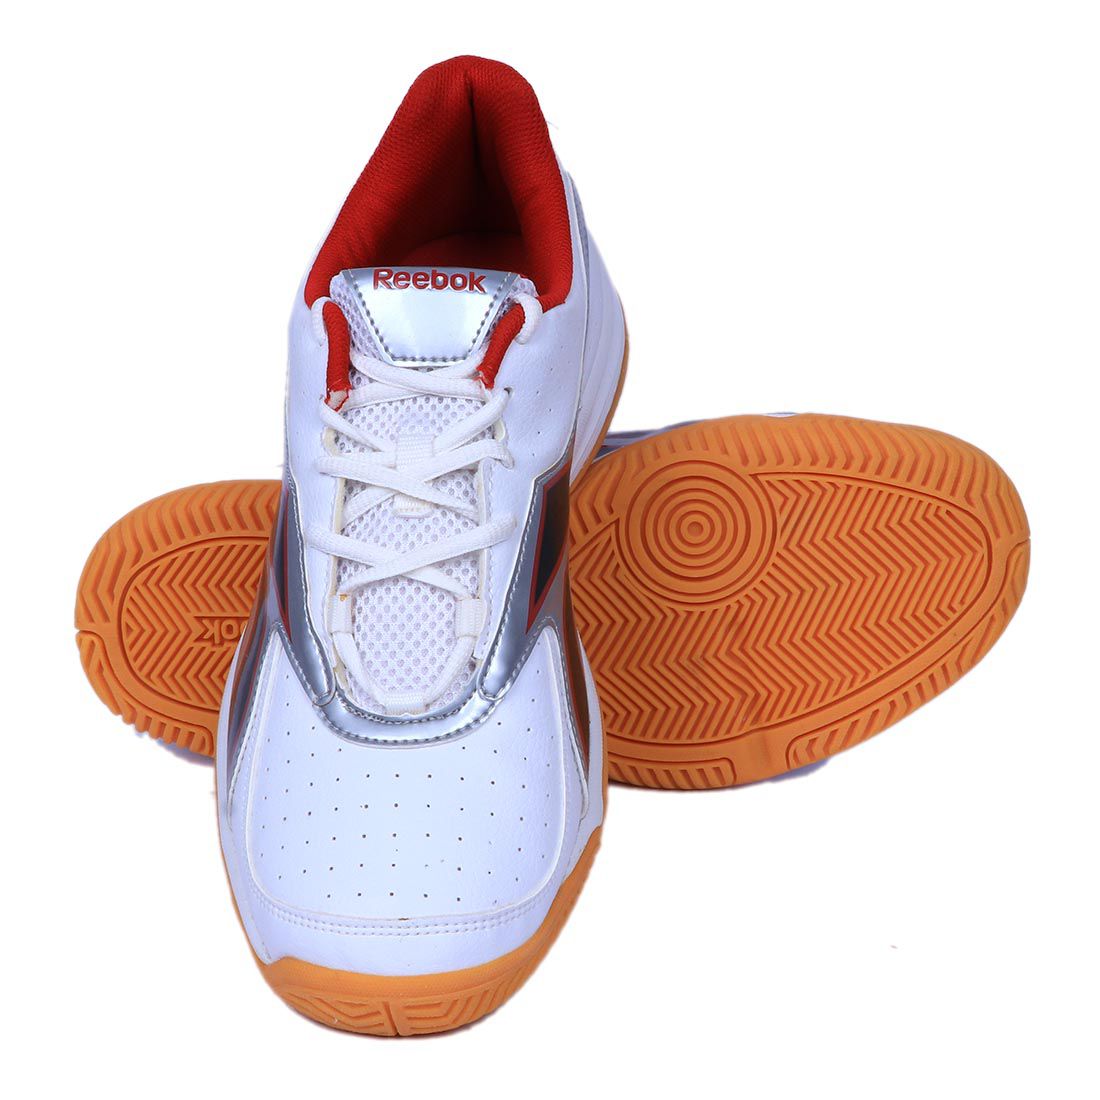 Reebok Match point indoor White Running Shoes - Buy Match point Running Shoes Online at Best Prices in India on Snapdeal